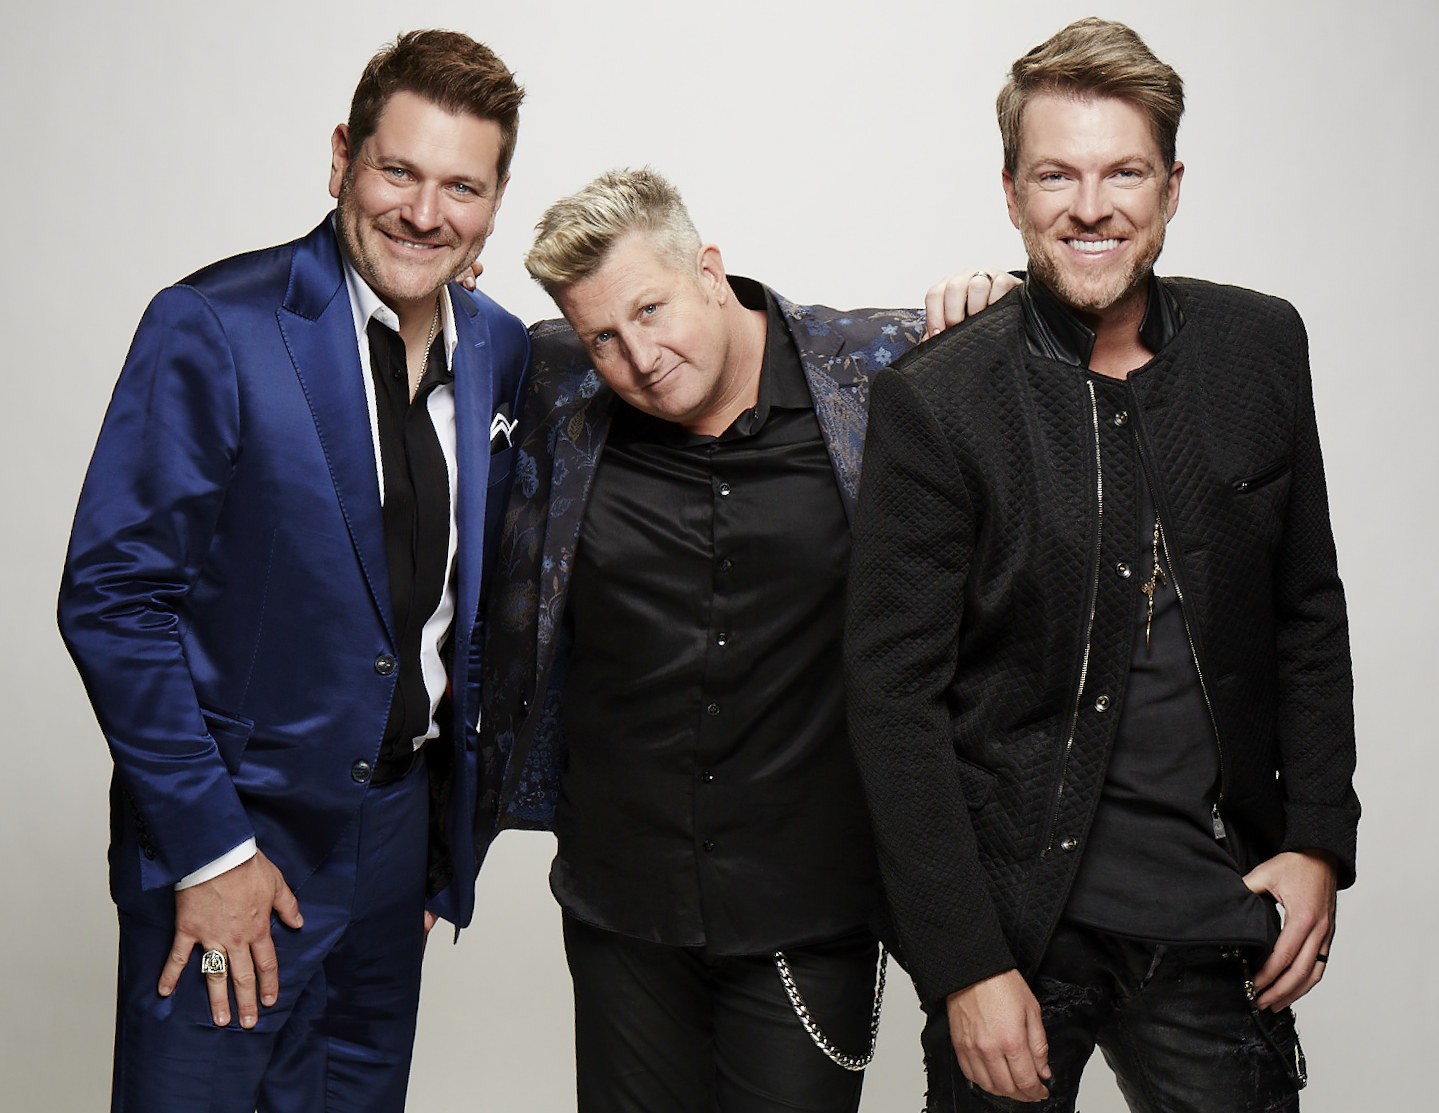 Rascal Flatts stops by the CBS Photo Booth during the 51st ACADEMY OF COUNTRY MUSIC AWARDS